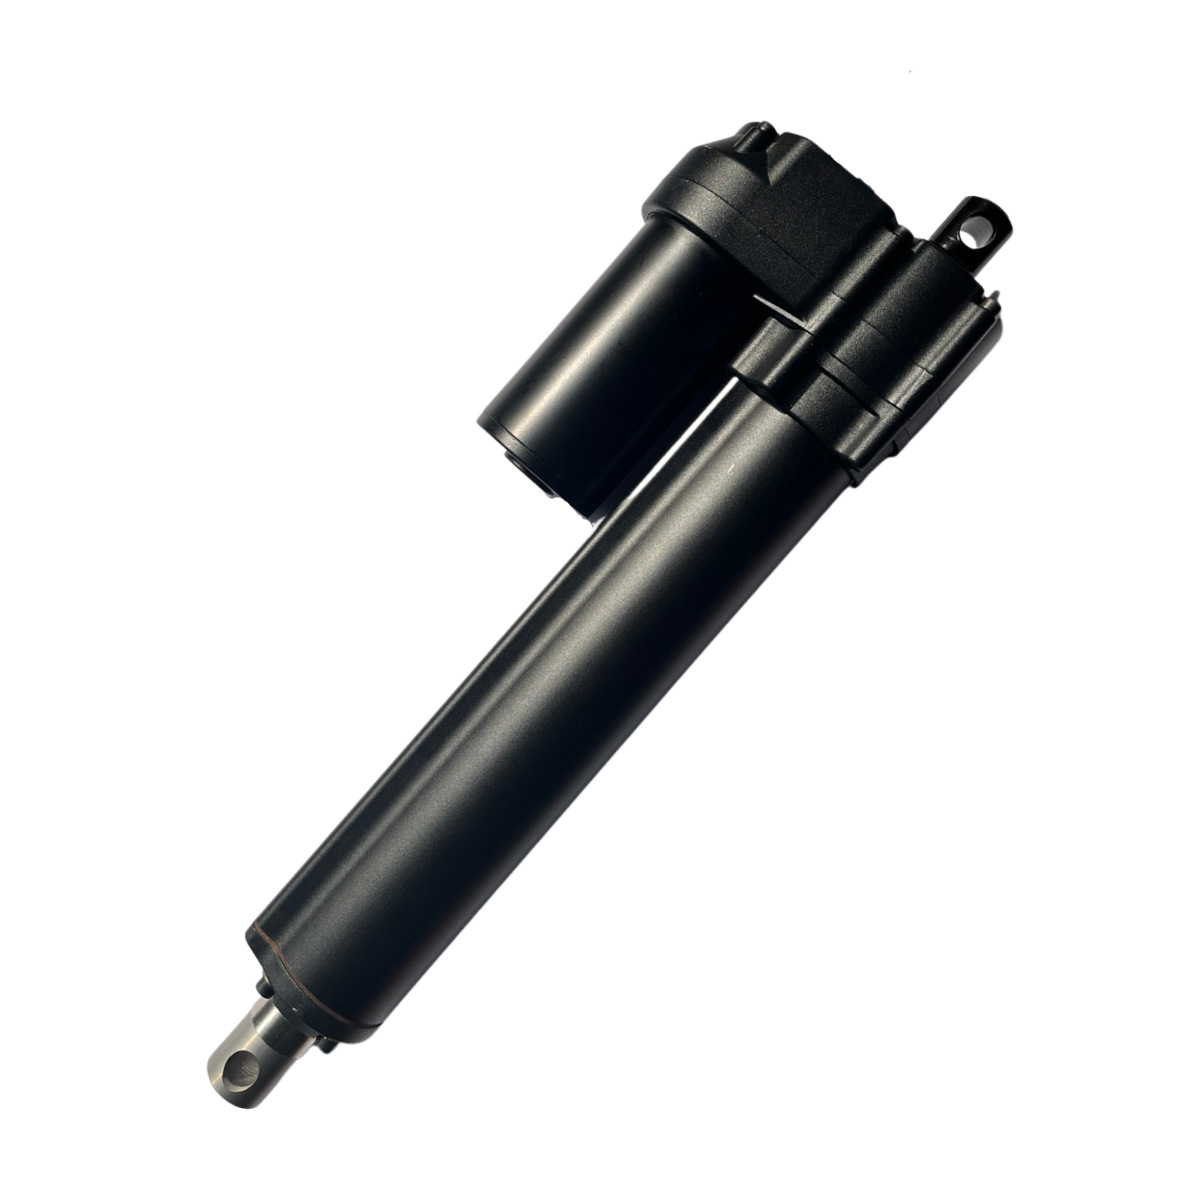 Aluminum Alloy Linear Actuator with Reed Switch Replace Cylinder